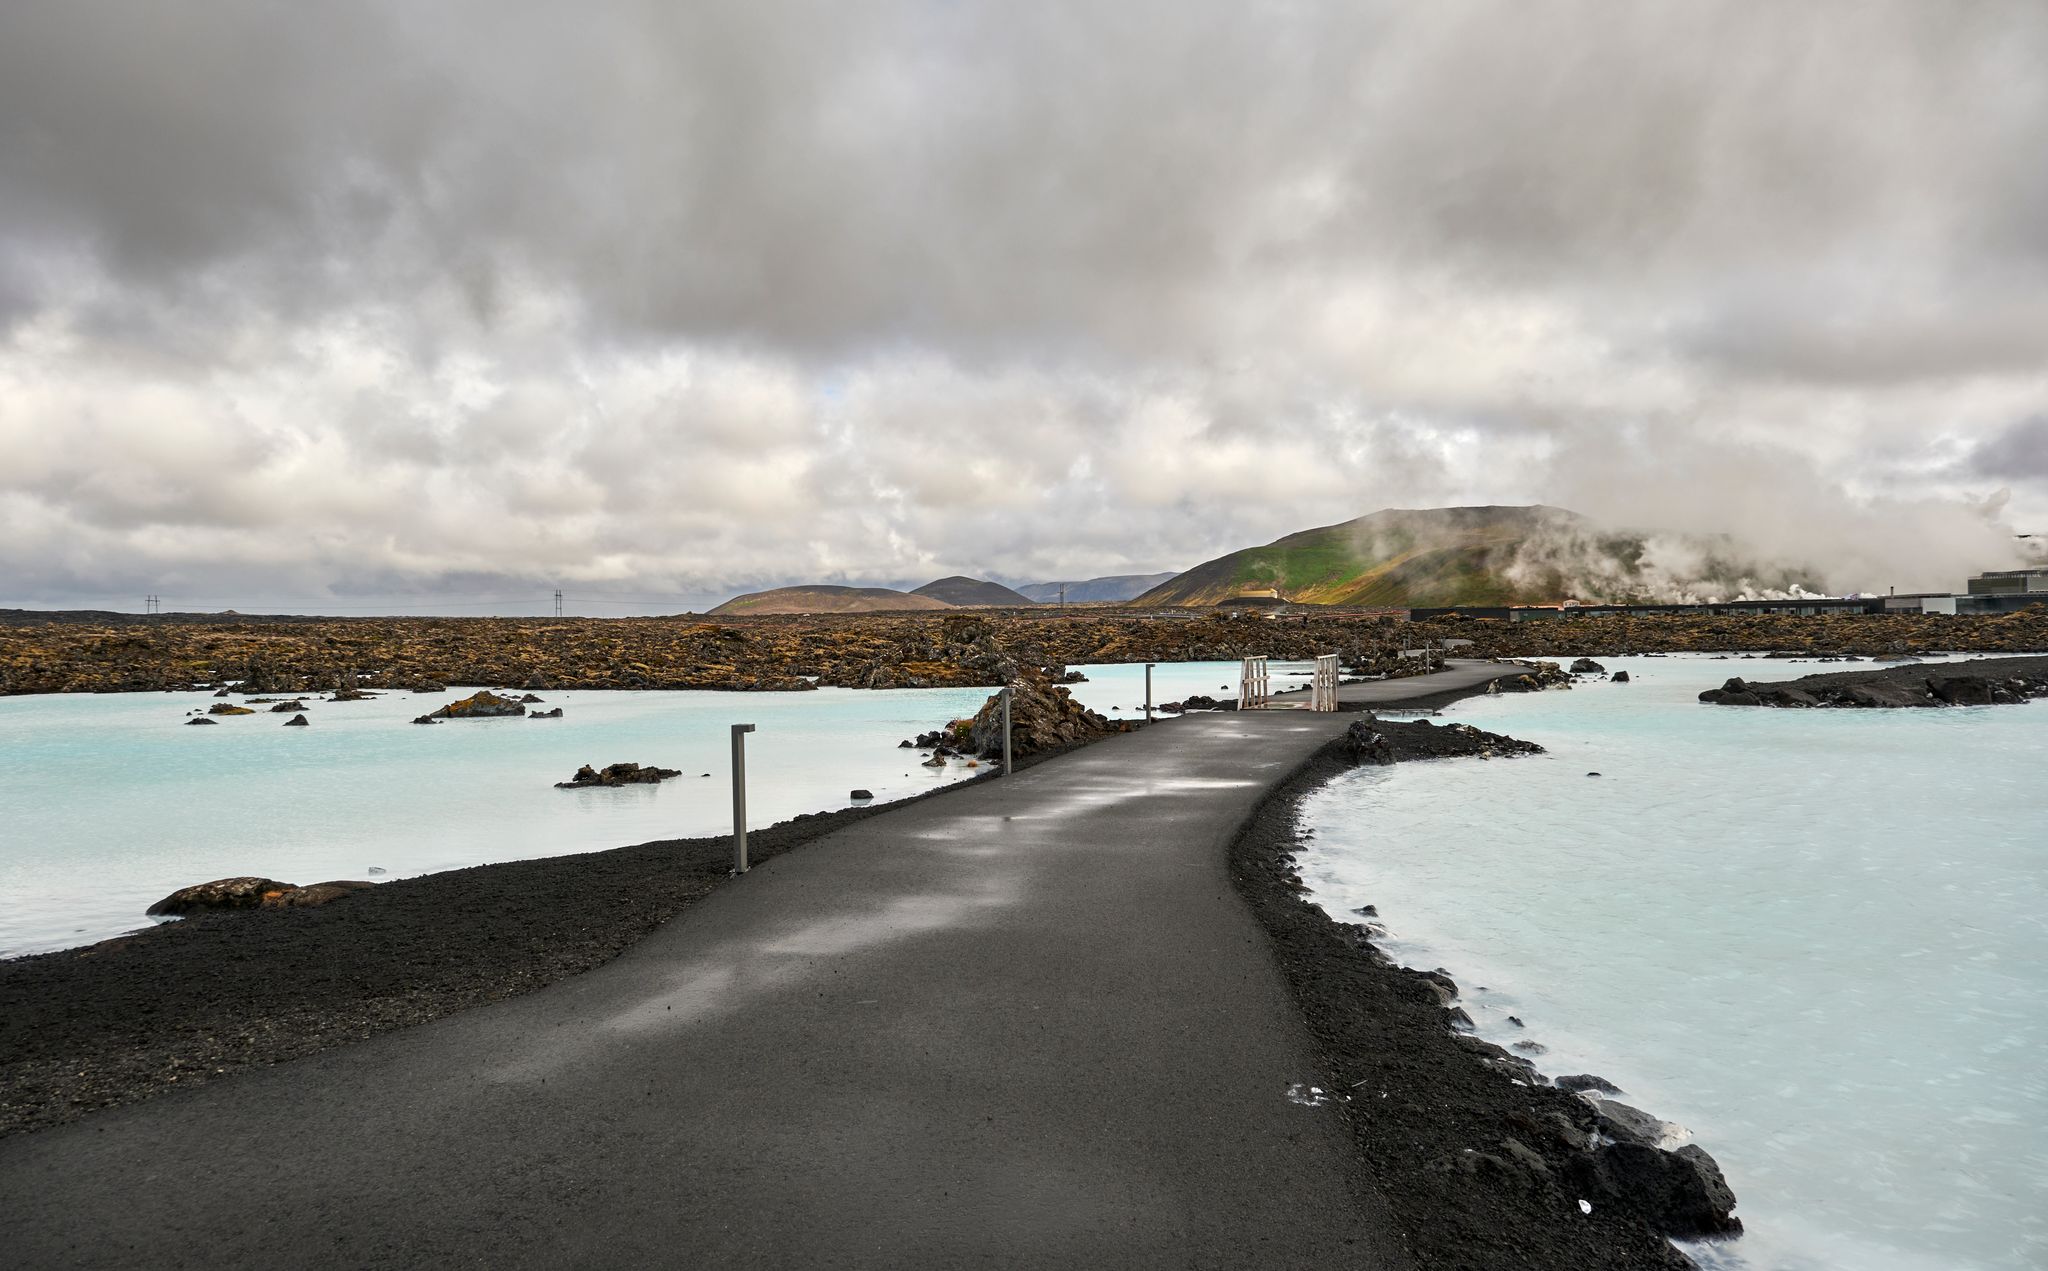 The Blue Lagoon will remain closed until November 30